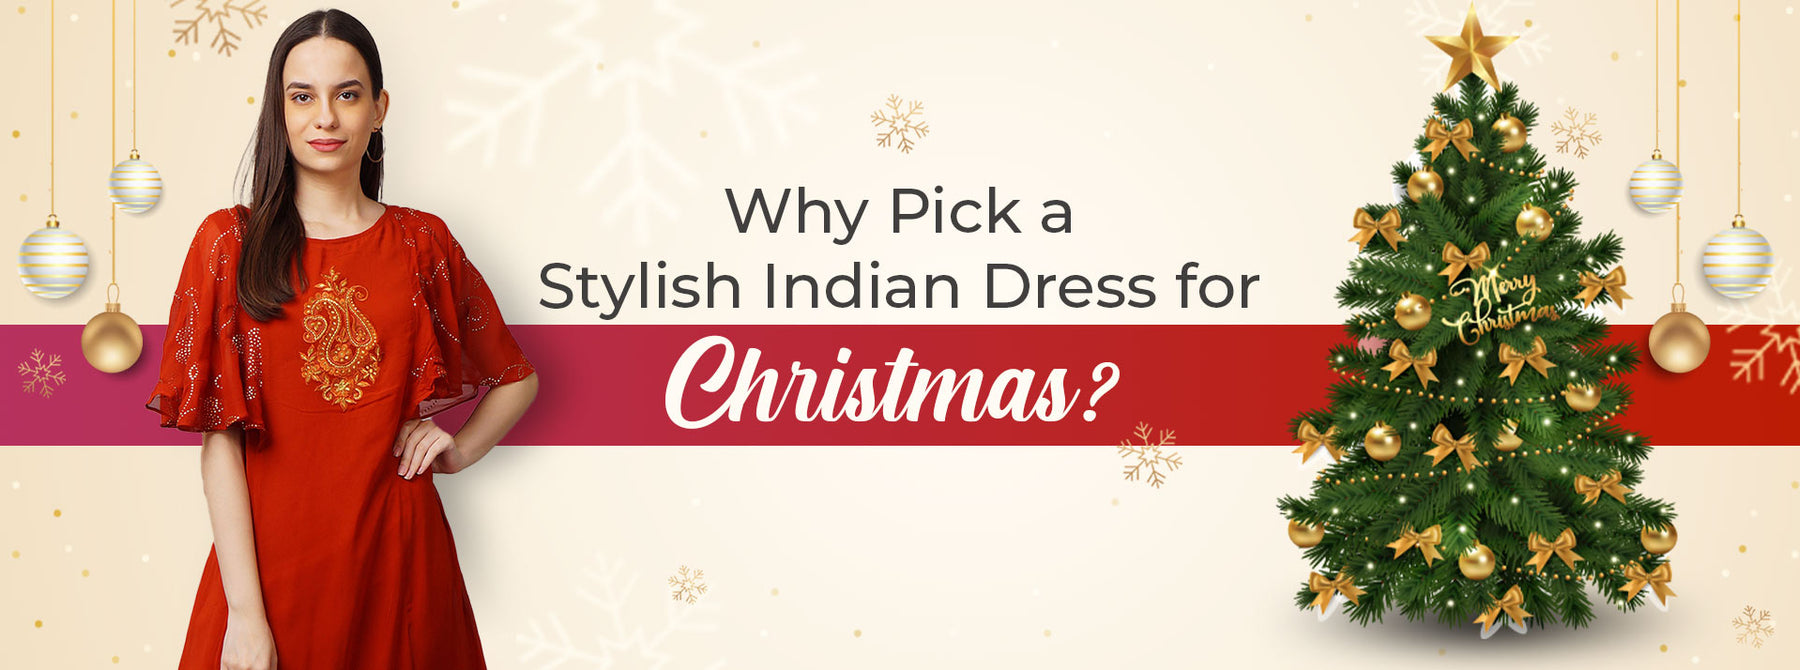 Why Pick a Stylish Indian Dress for Christmas?